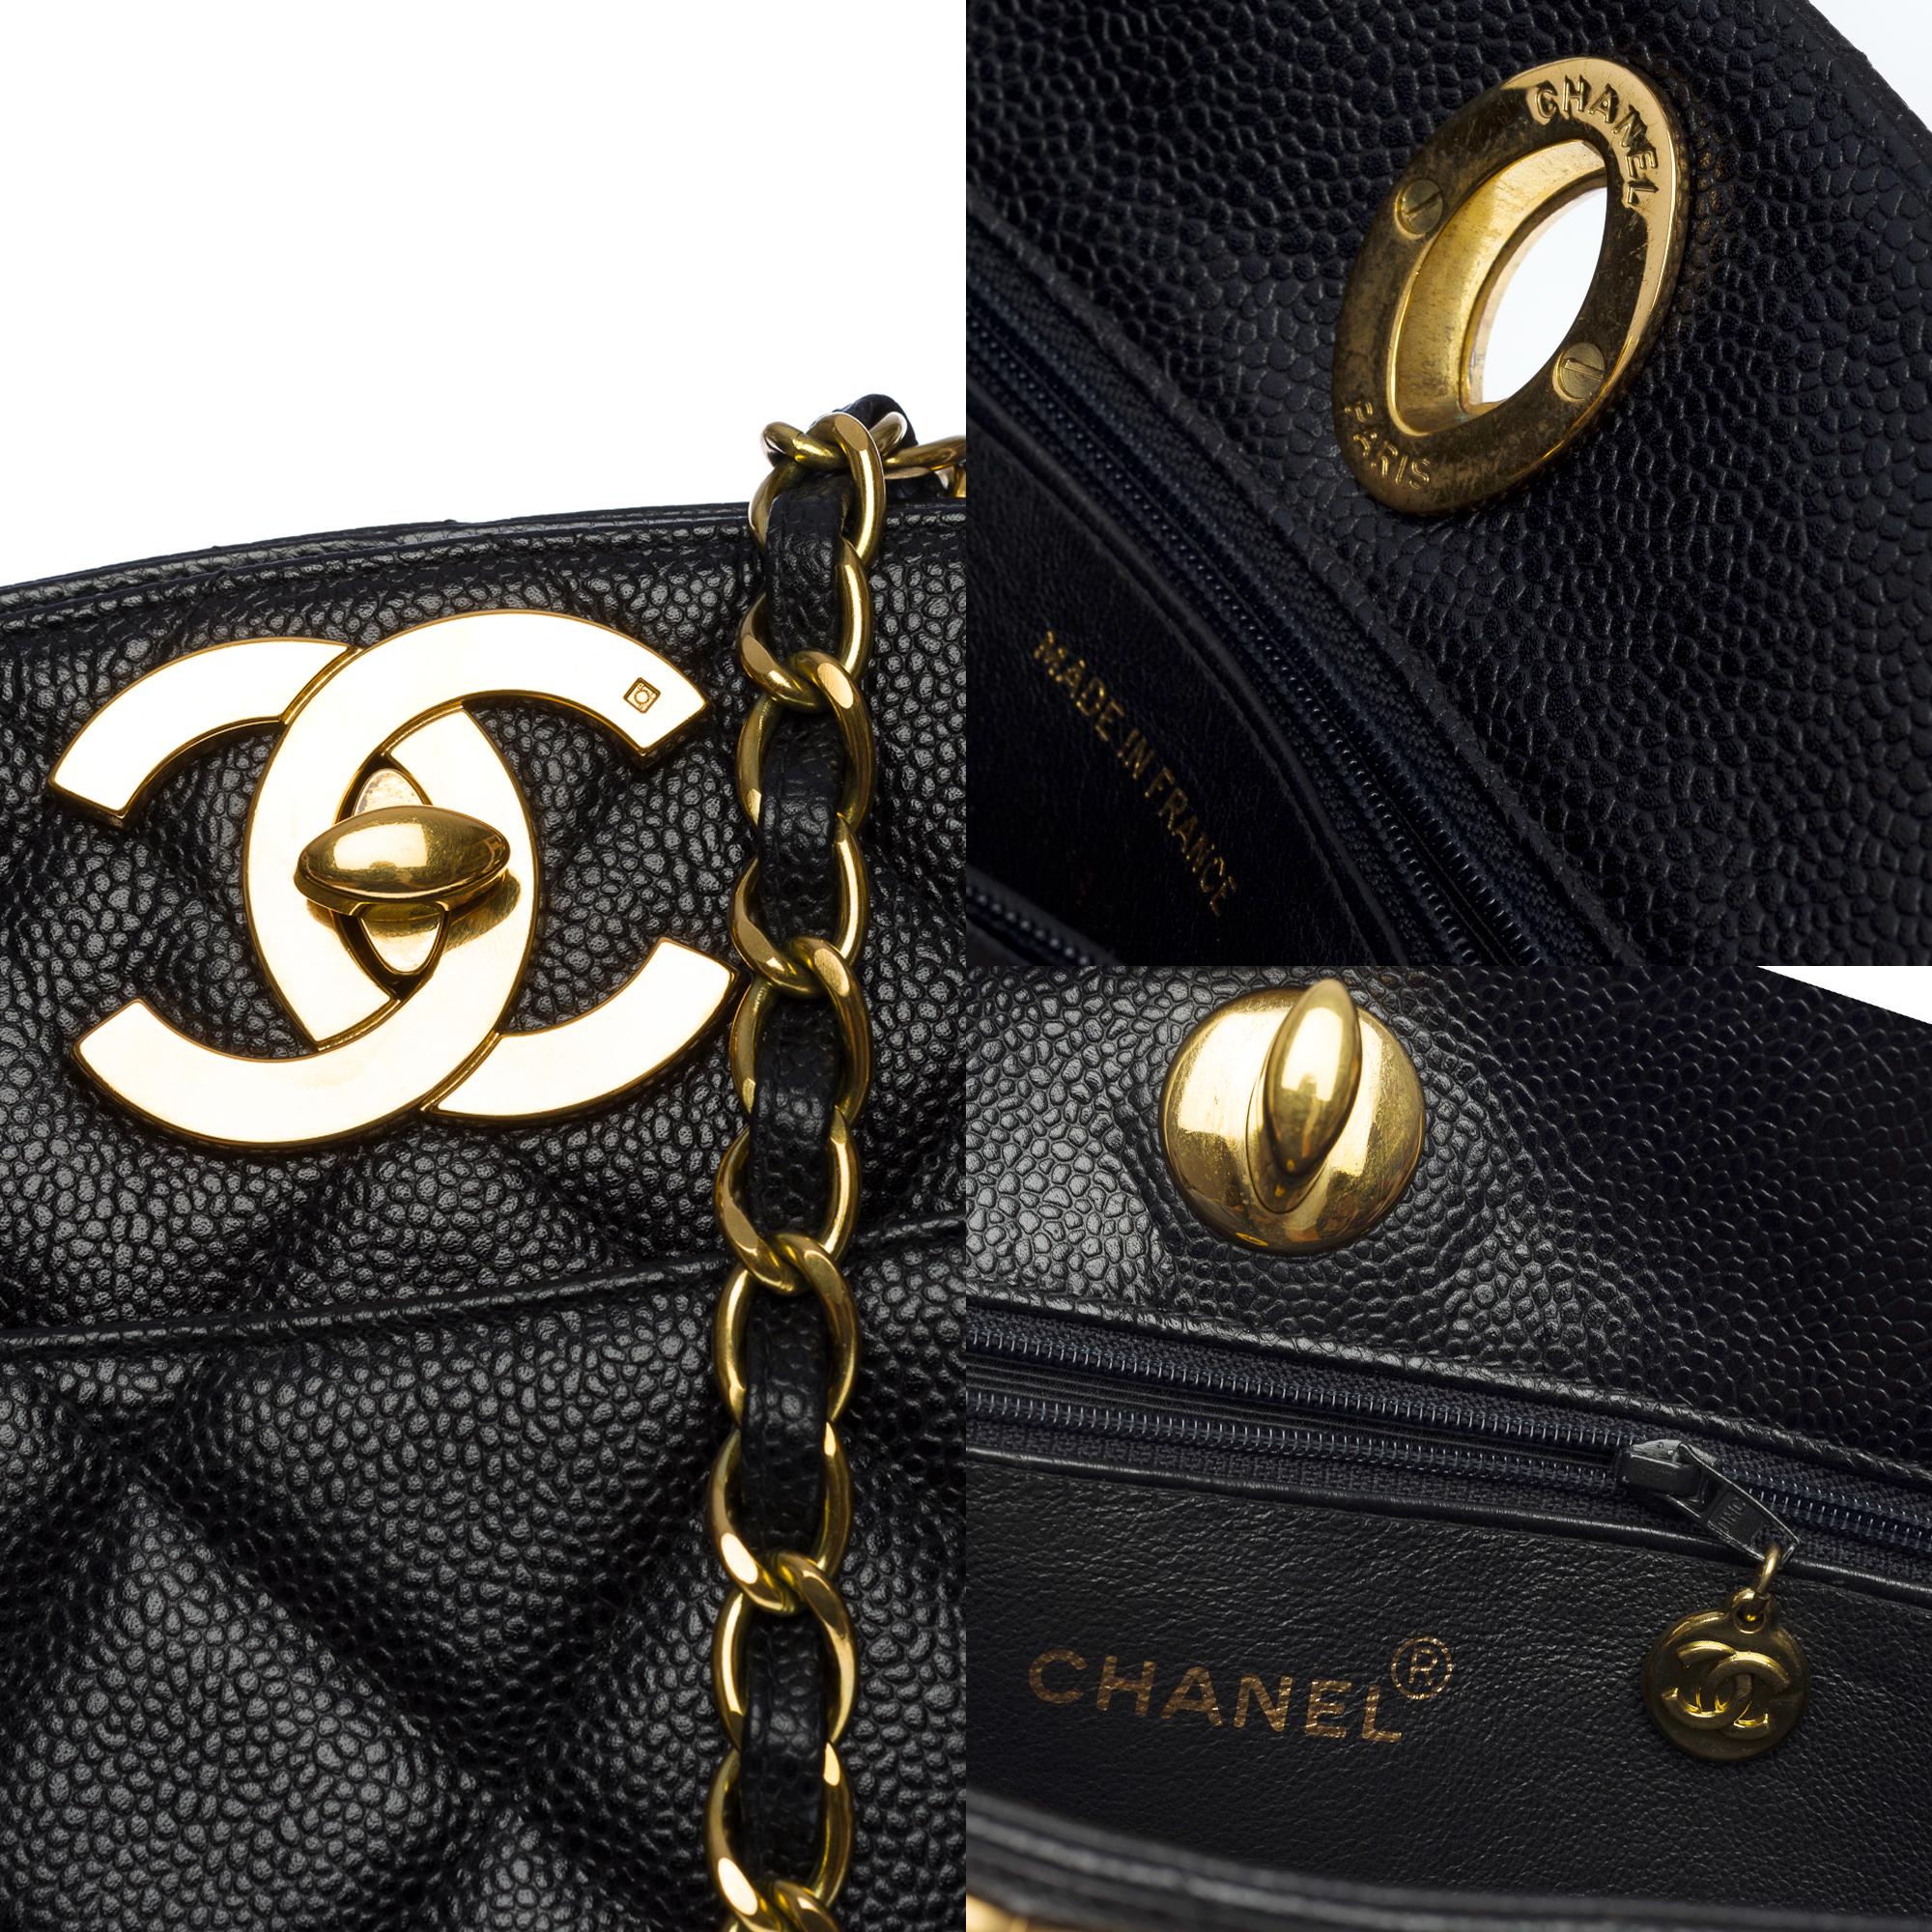 Amazing Chanel Shopping Tote in black Caviar quilted leather and gold hardware 1